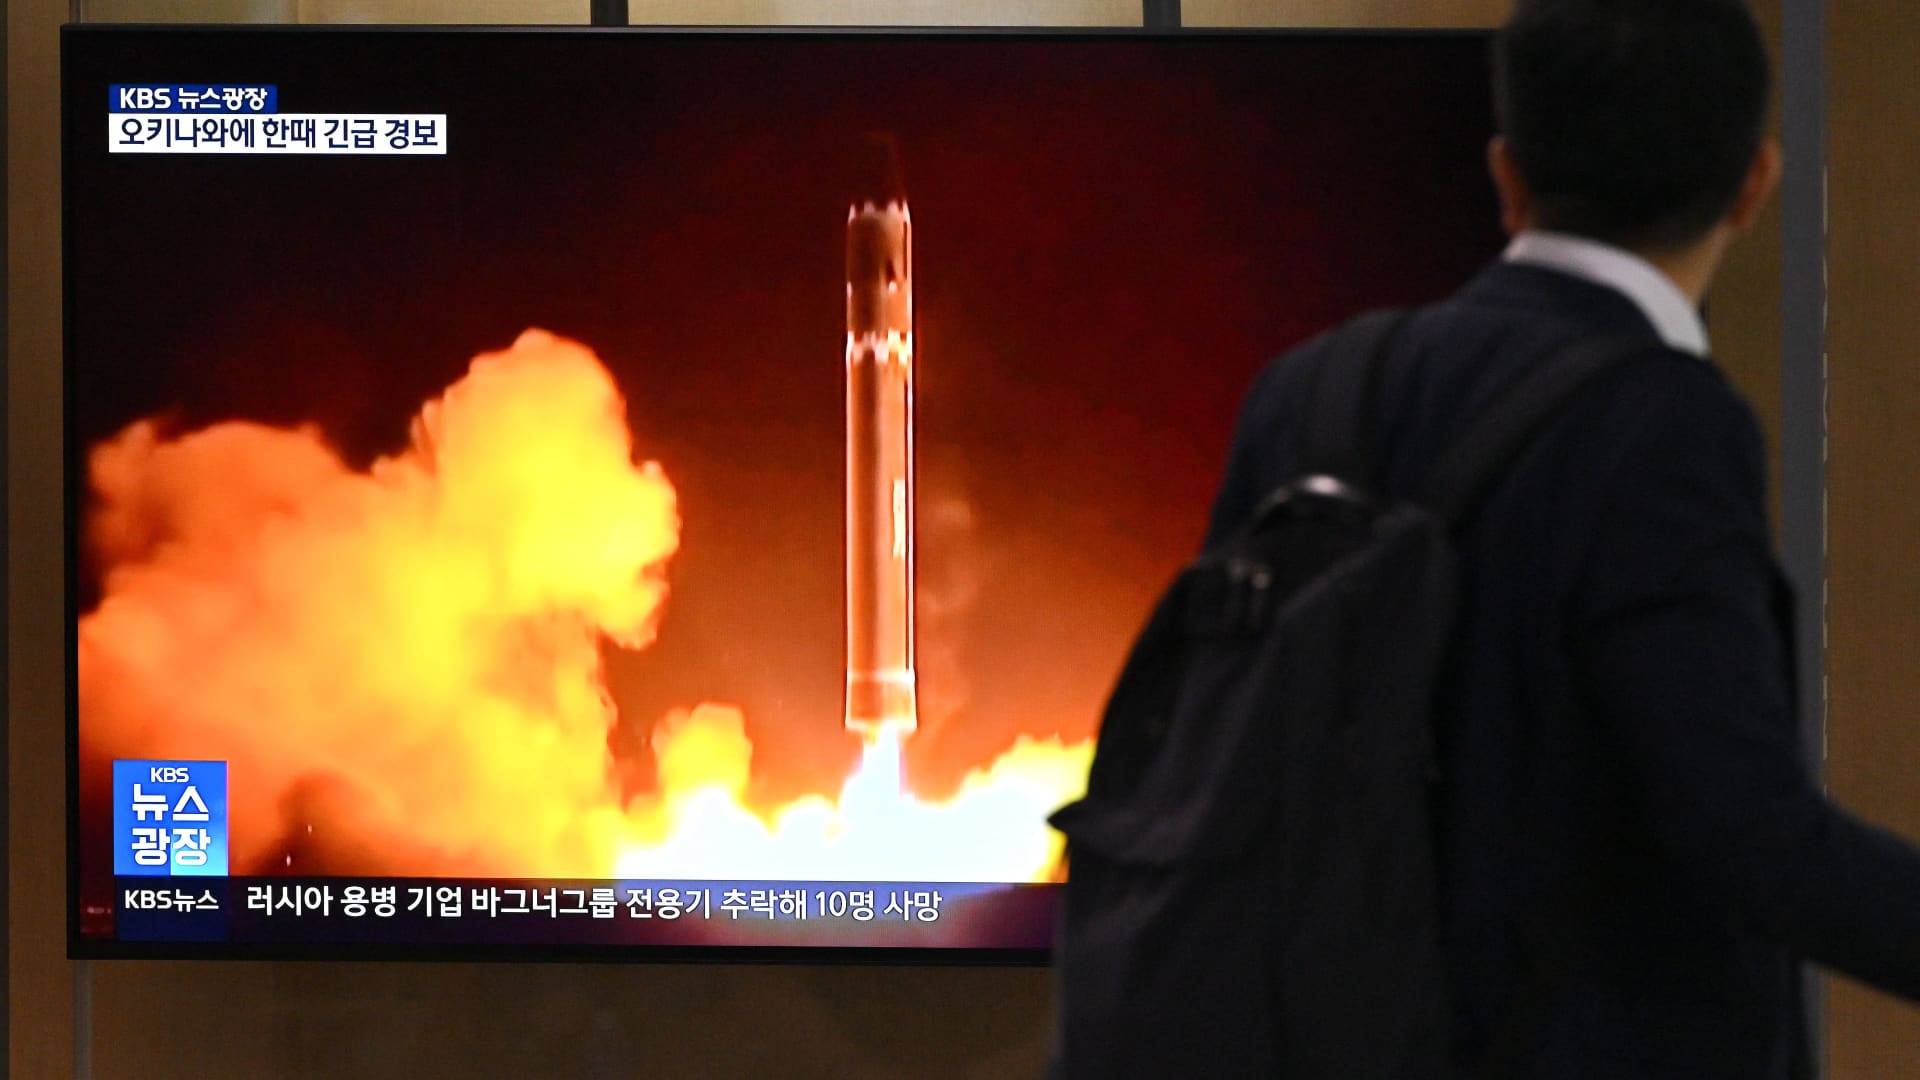 North Korea's attempt to put a spy satellite into orbit ended in failure, state media said on August 24, 2023 just months after Pyongyang's first launch crashed into the ocean shortly after blast off.